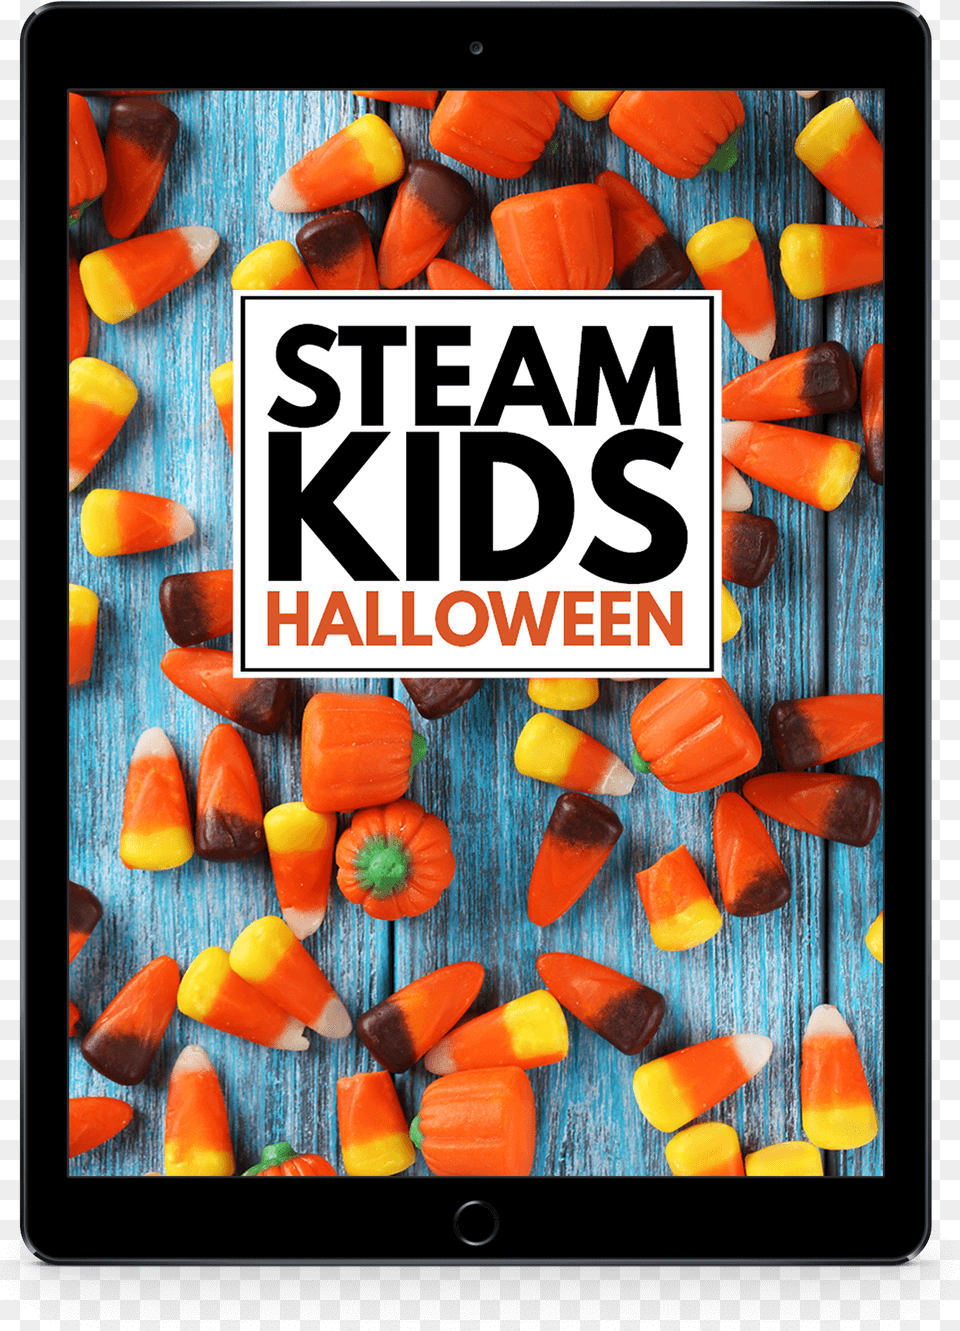 Steam Kids Halloween Ipad Background Compressed Halloween Math Crafts, Candy, Food, Sweets Free Png